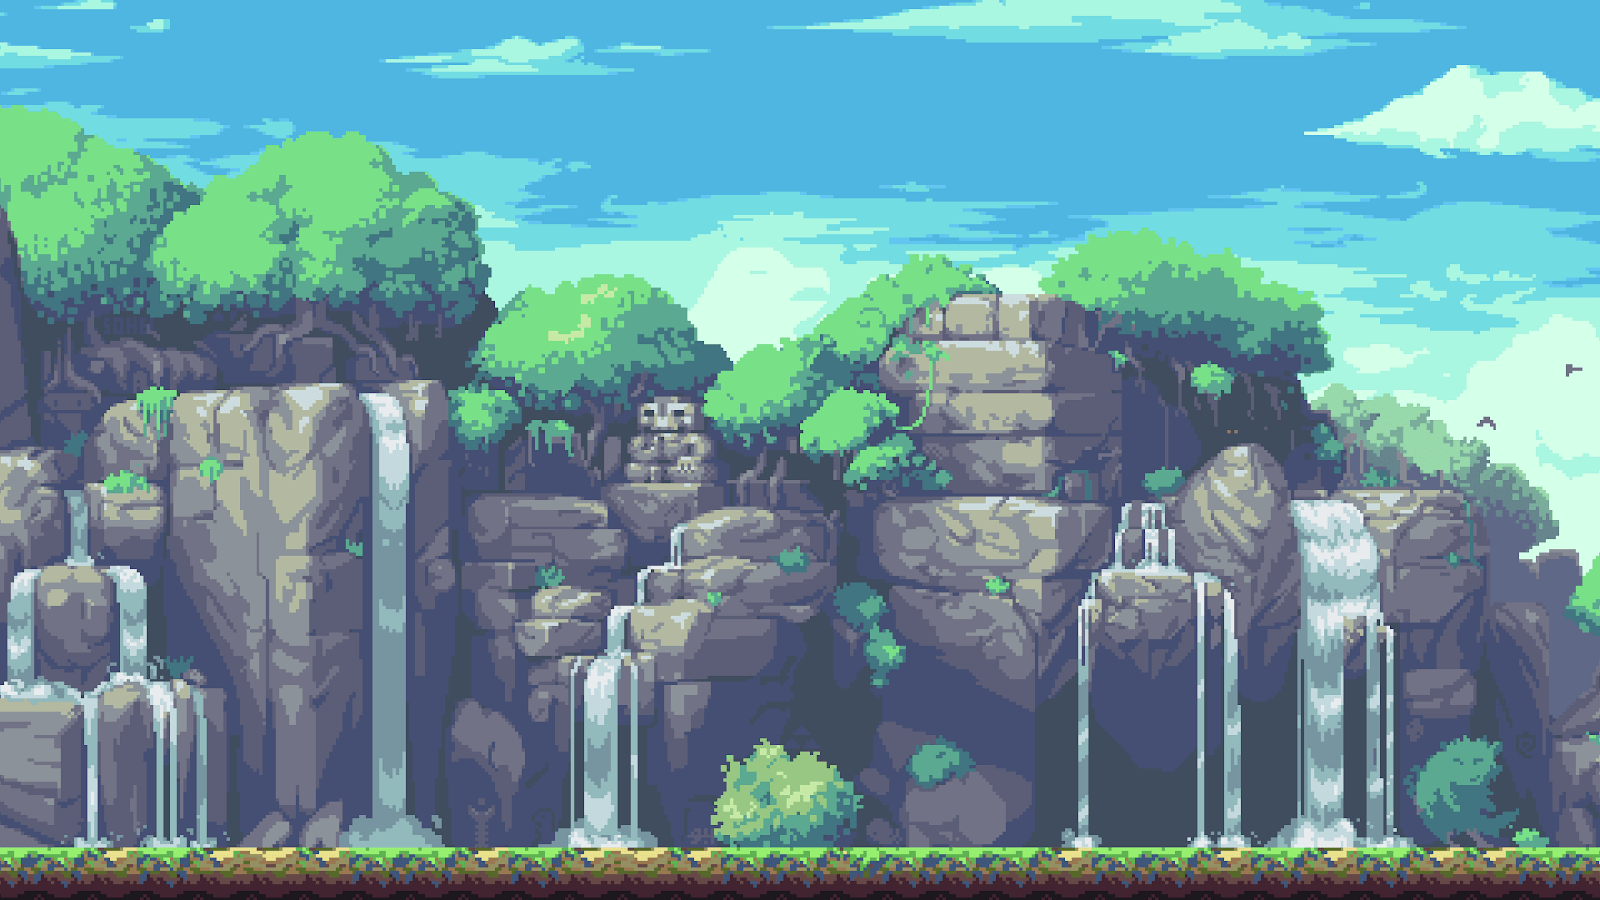 A pixel art scene with waterfalls and trees - Pixel art